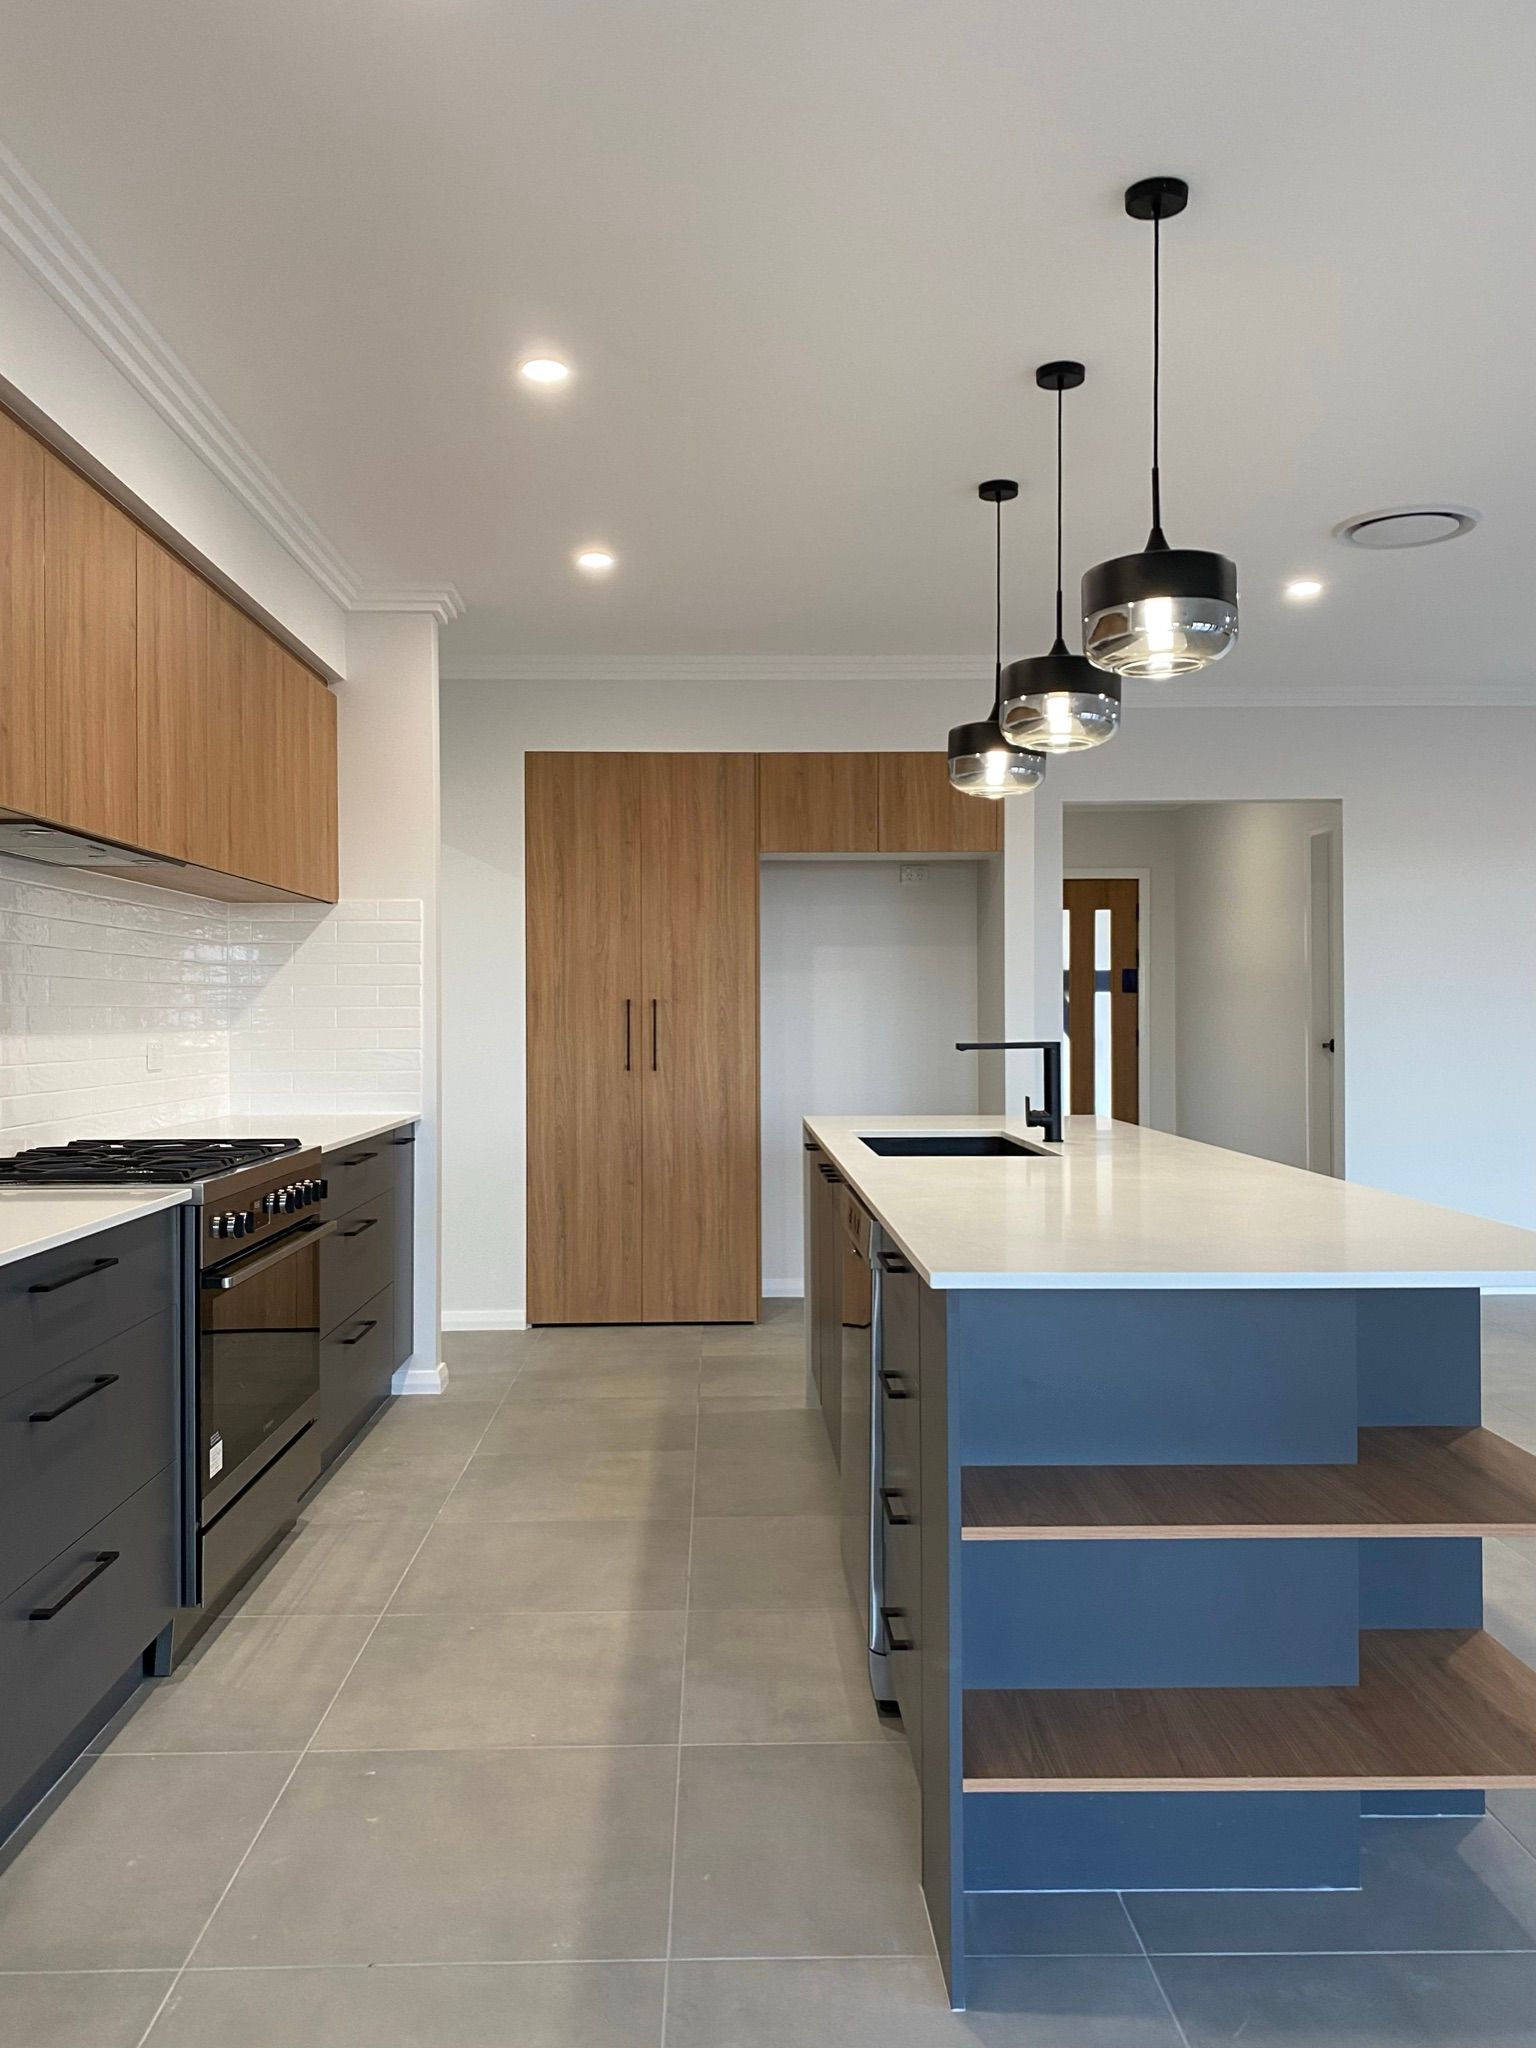 Kitchen Interior With Sink, Cabinets and Gas Oven — Kitchen Renovations in Dubbo, QLD